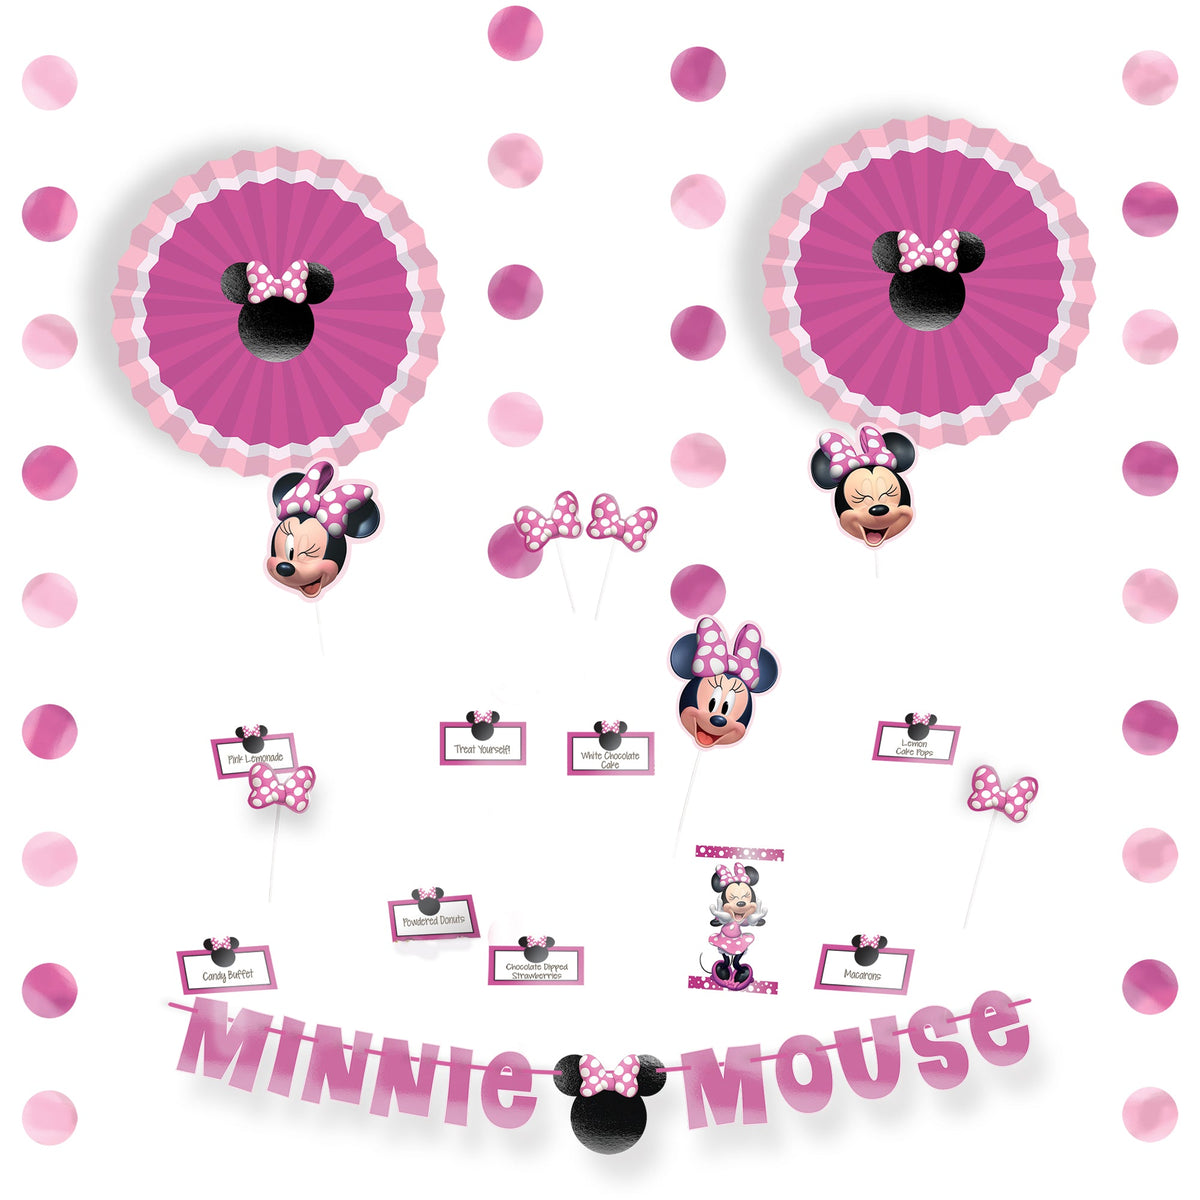 Minnie Mouse Forever Buffet Table 23 piece Decorating Kit